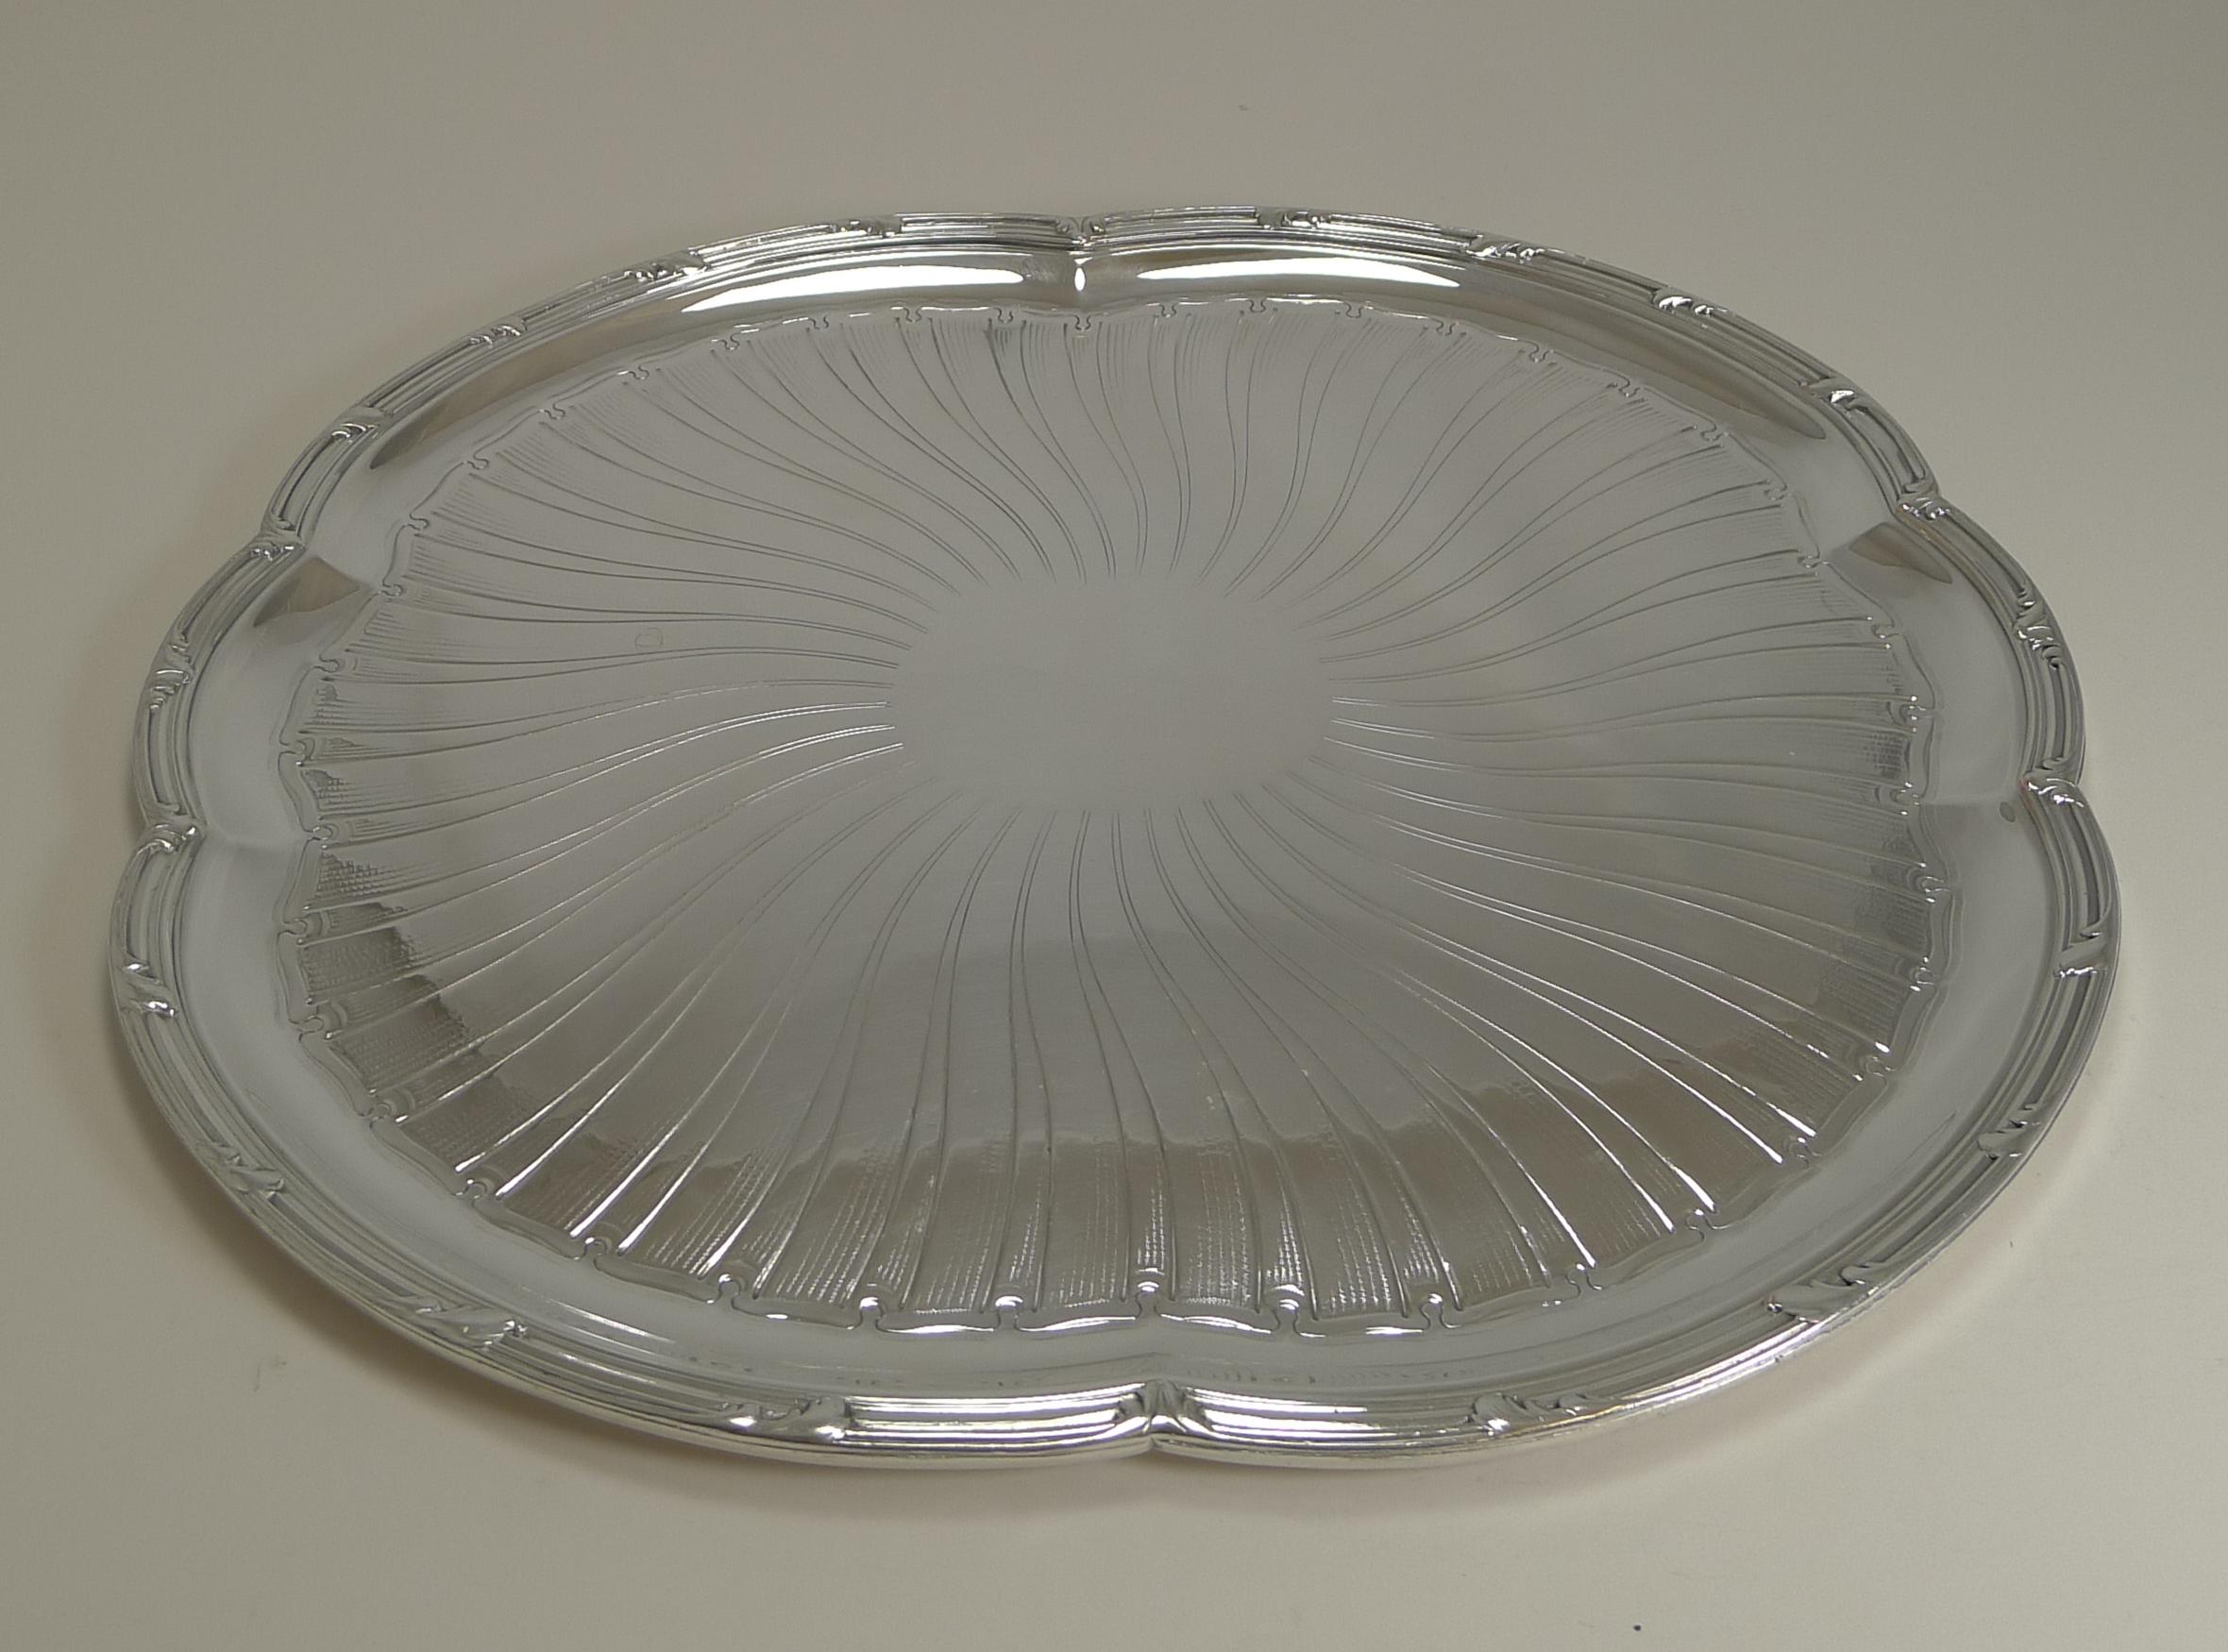 Antique French Christofle Silver Plated Tray, circa 1896 Art Nouveau 1